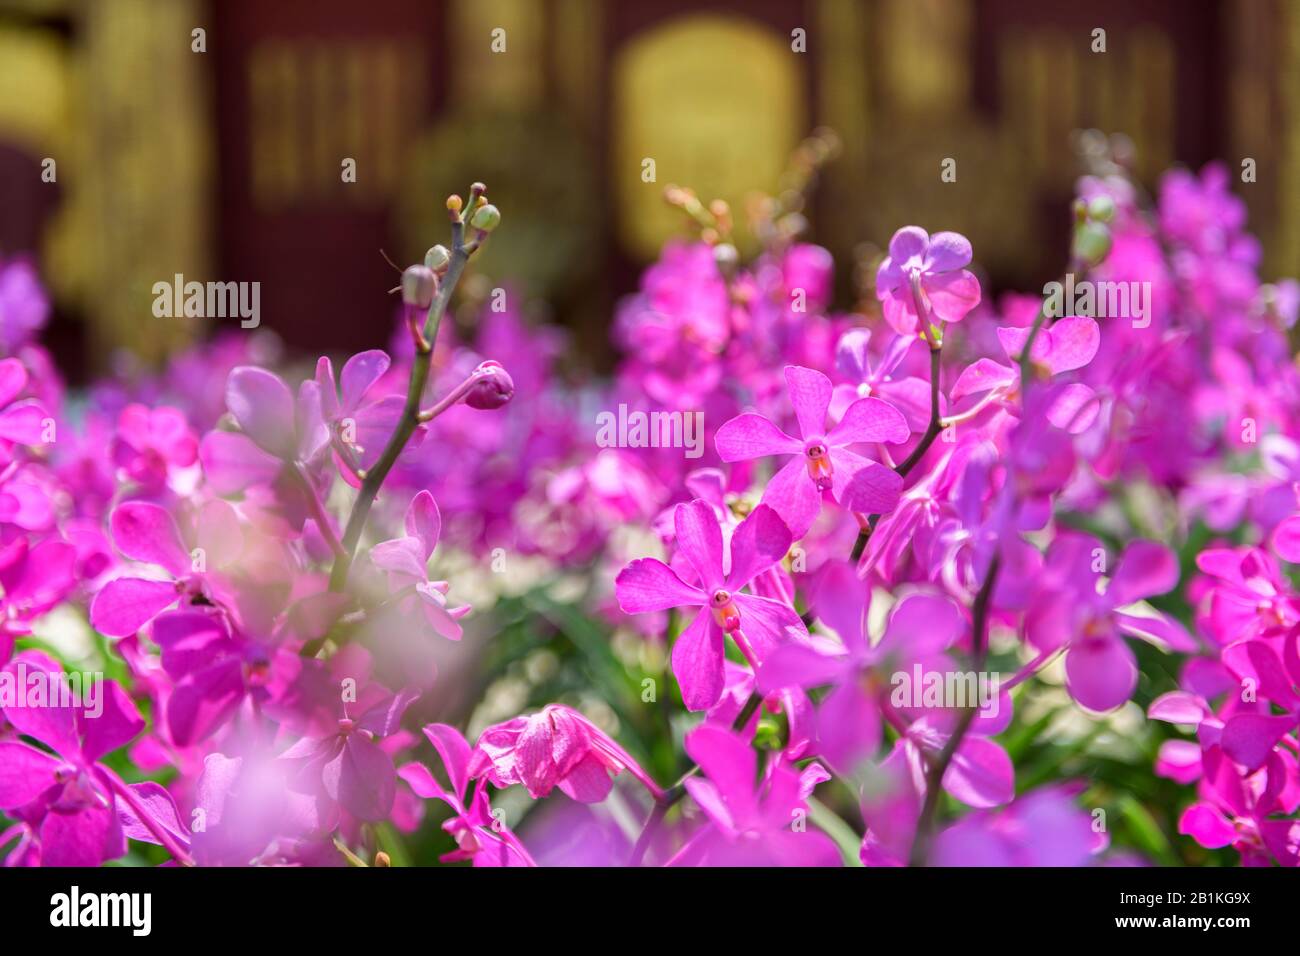 Ascocenda orchid Beautiful pink flowers blooming in garden. pretty blooming tropical plants. Colorful petals, nature background Stock Photo